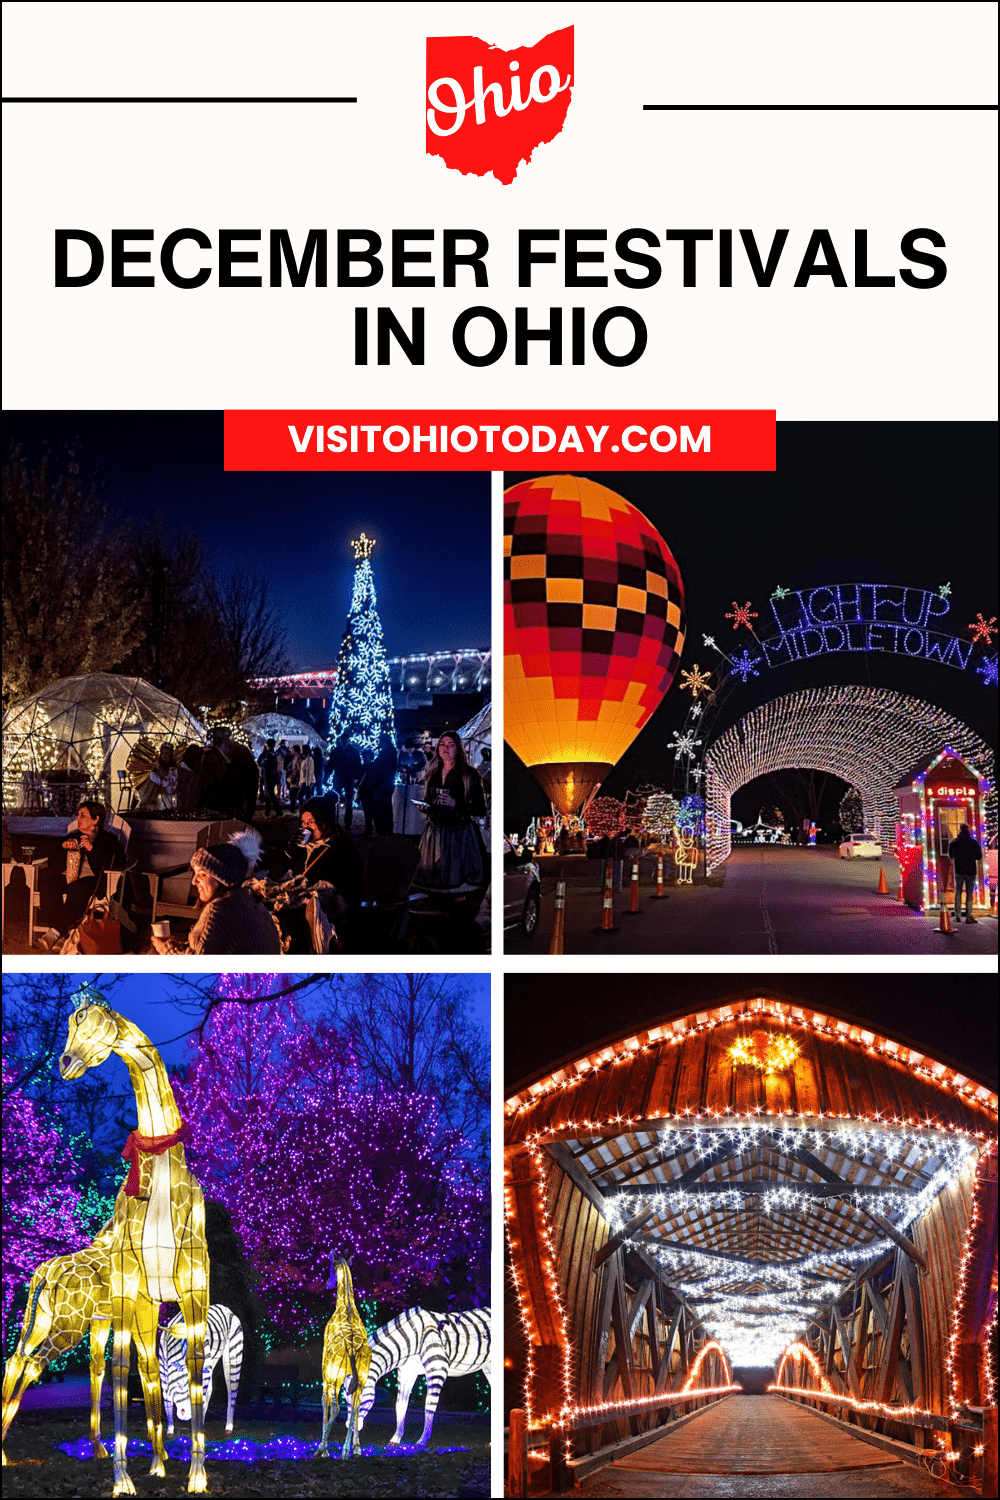 December is the month to celebrate the holidays and winter. This list of December Festivals in Ohio can help you find ways to enjoy the month!